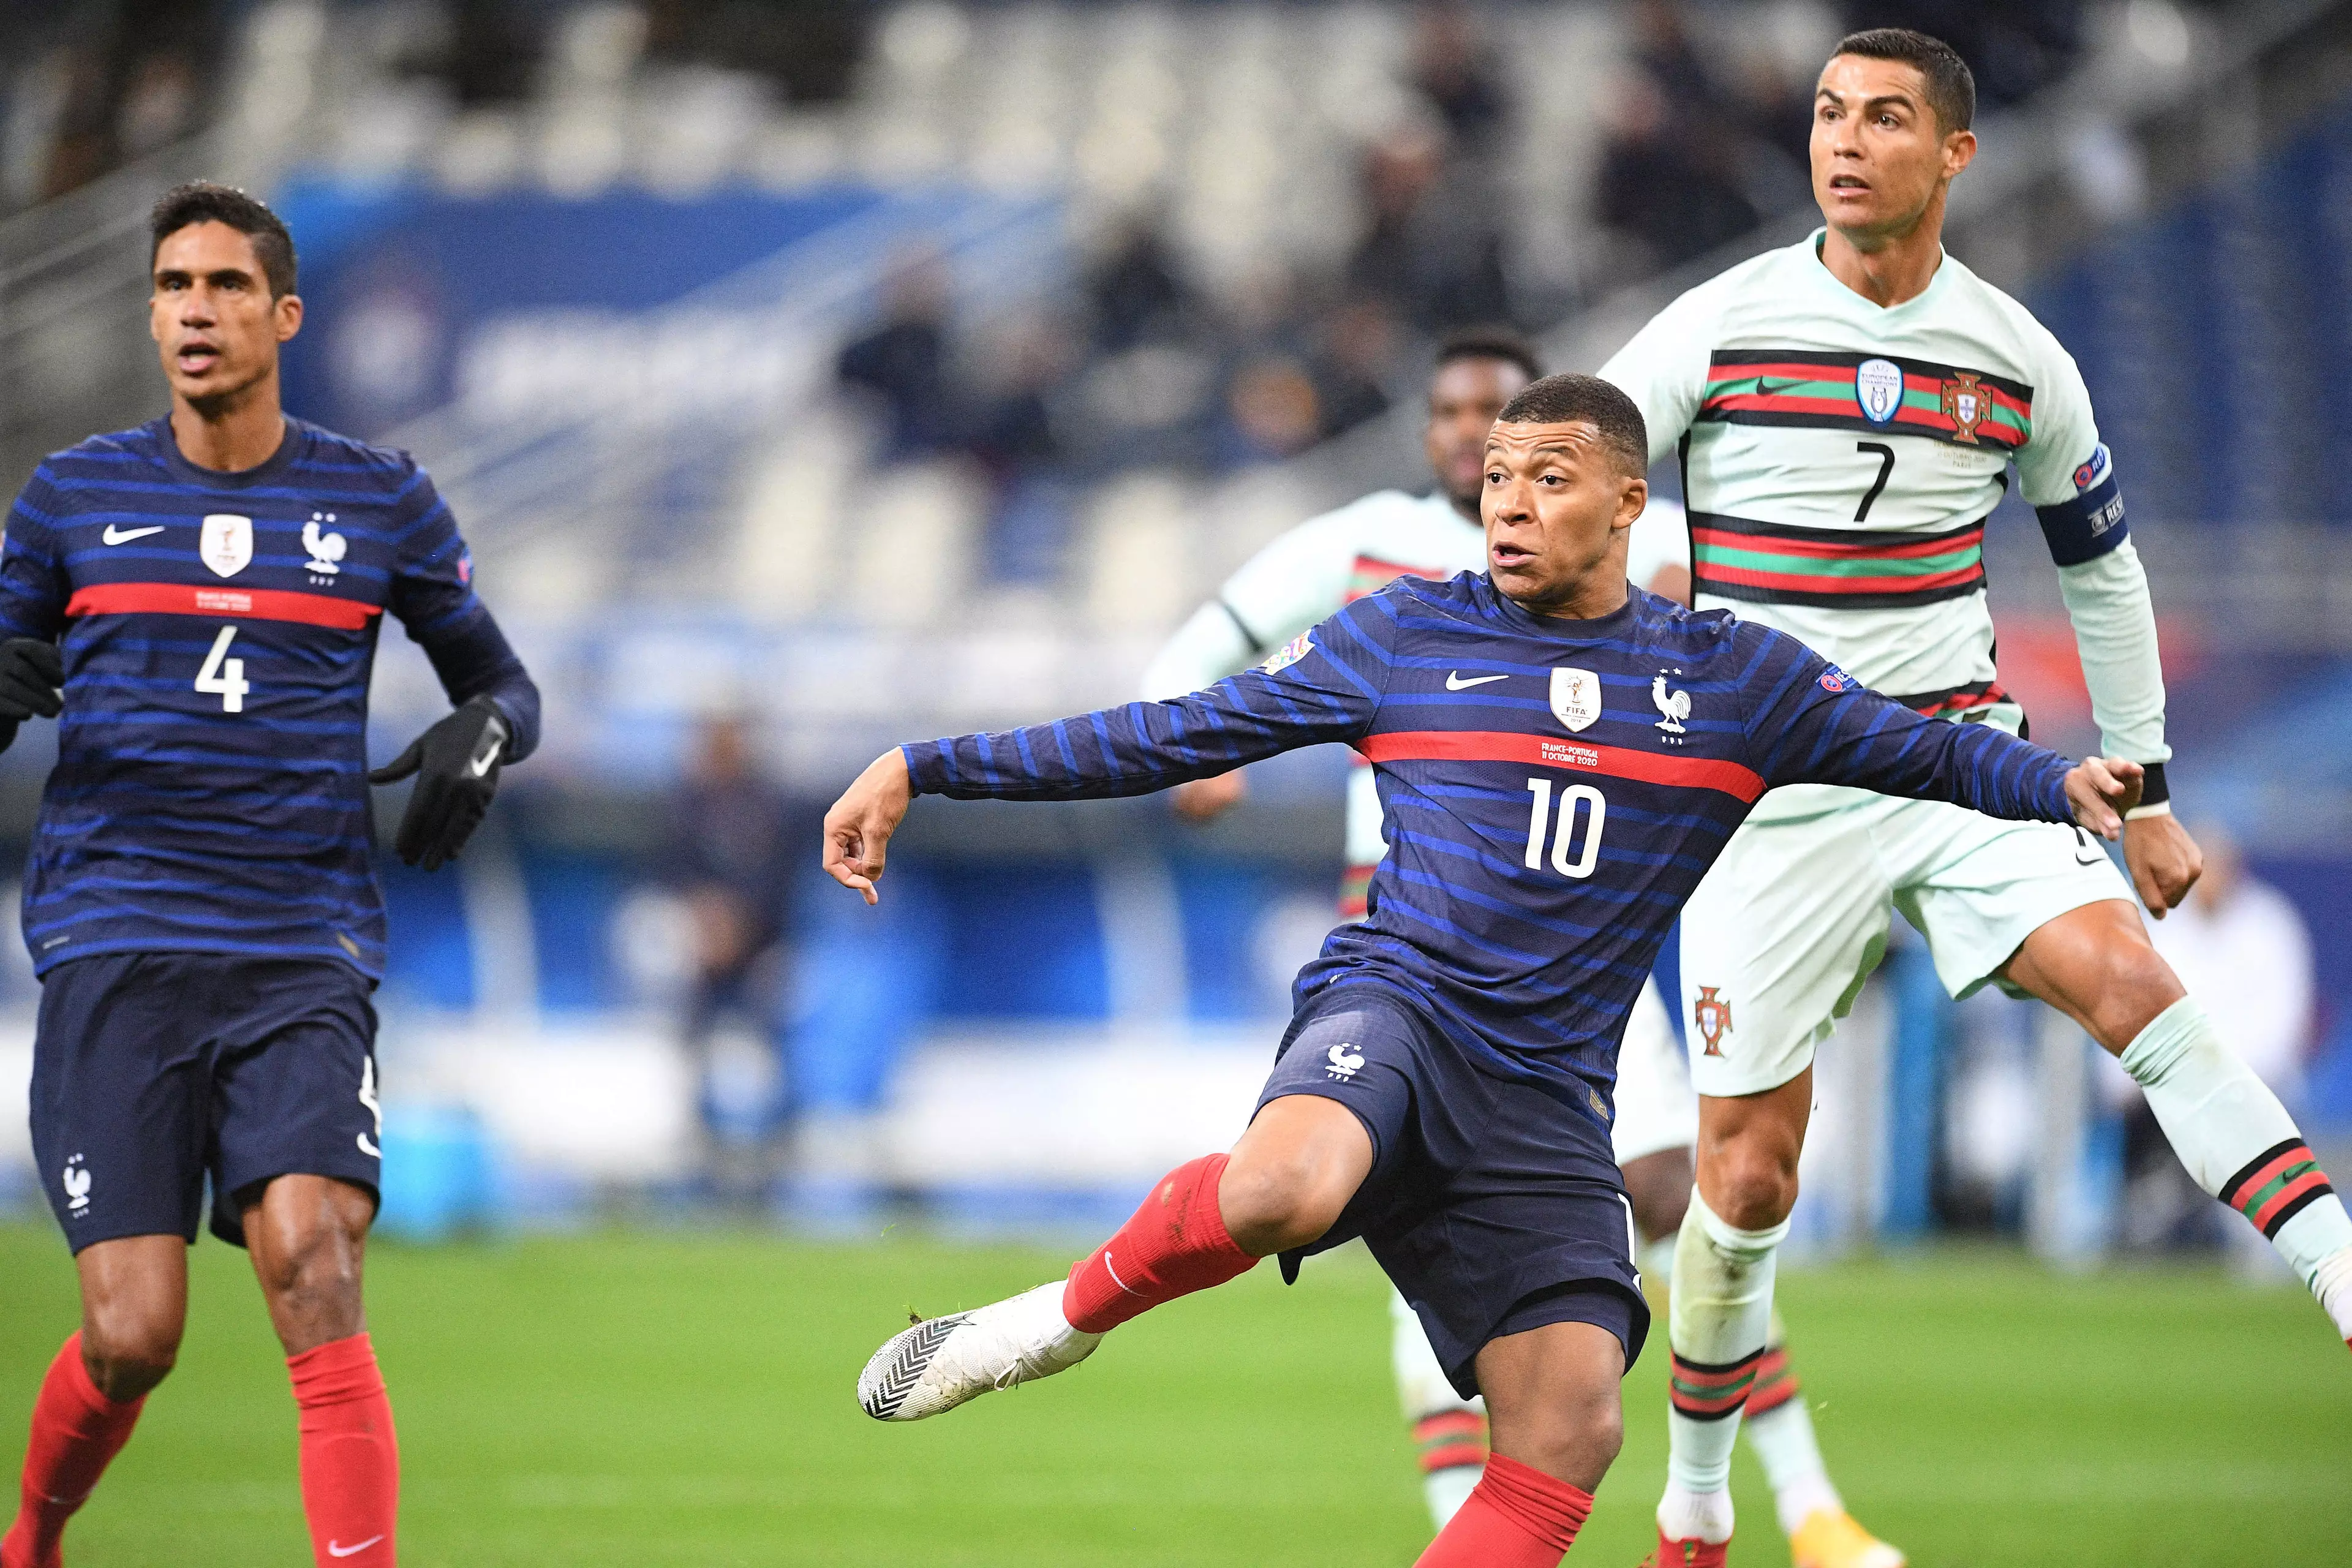 Ronaldo's Portugal recently met France in the Nations League.